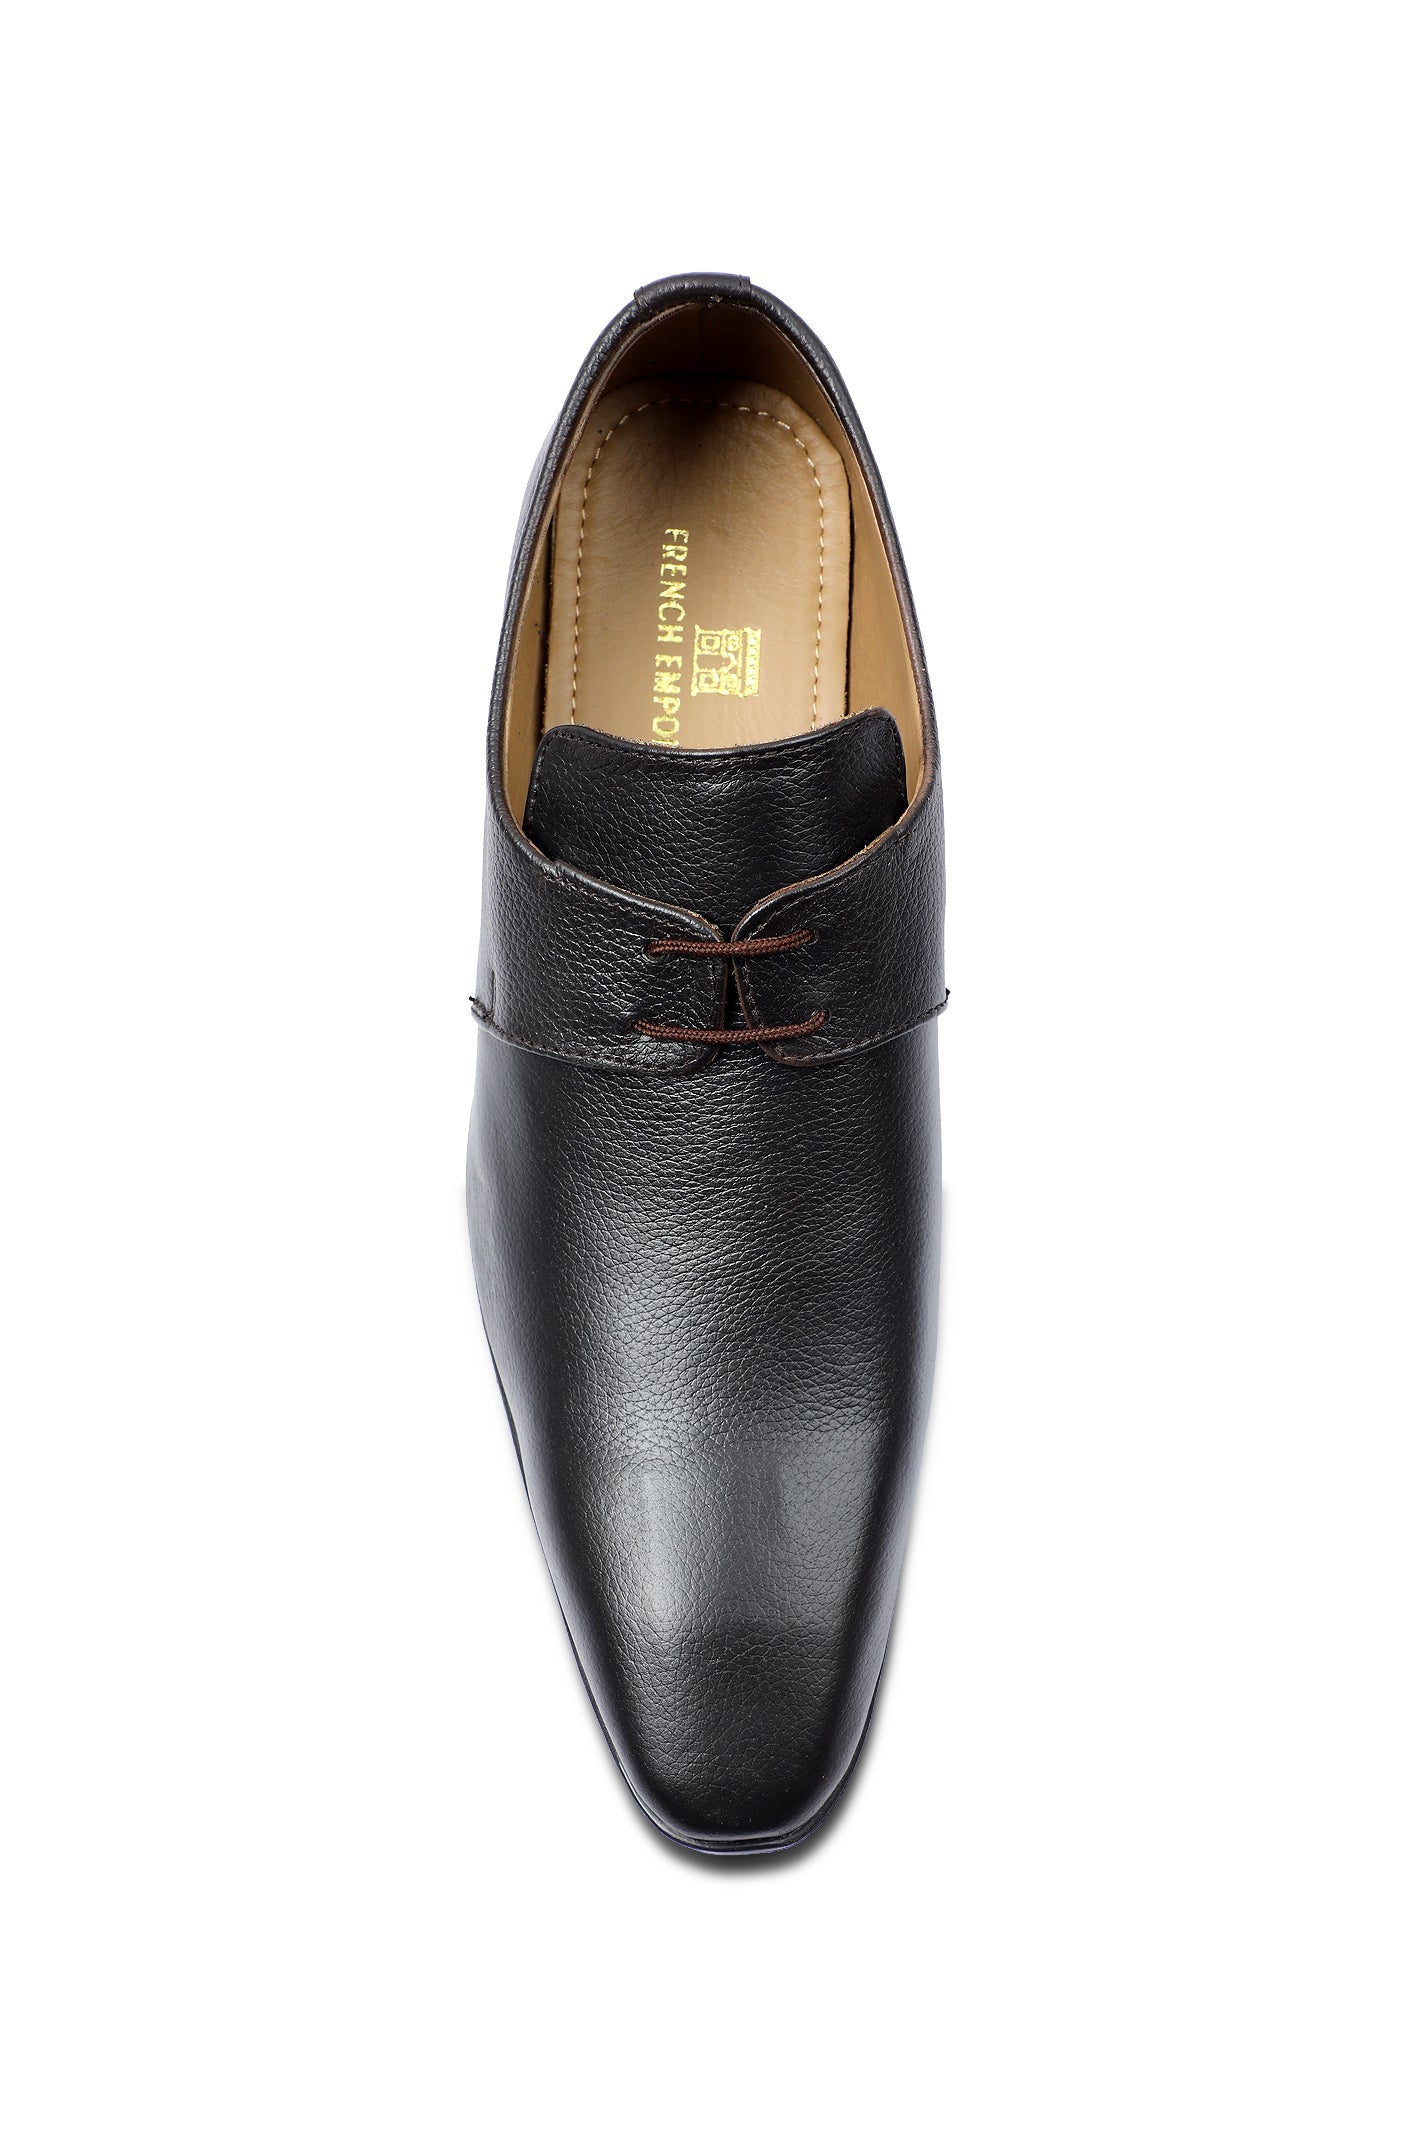 Formal Shoes For Men SKU: SMF-0215-COFFEE - Diners